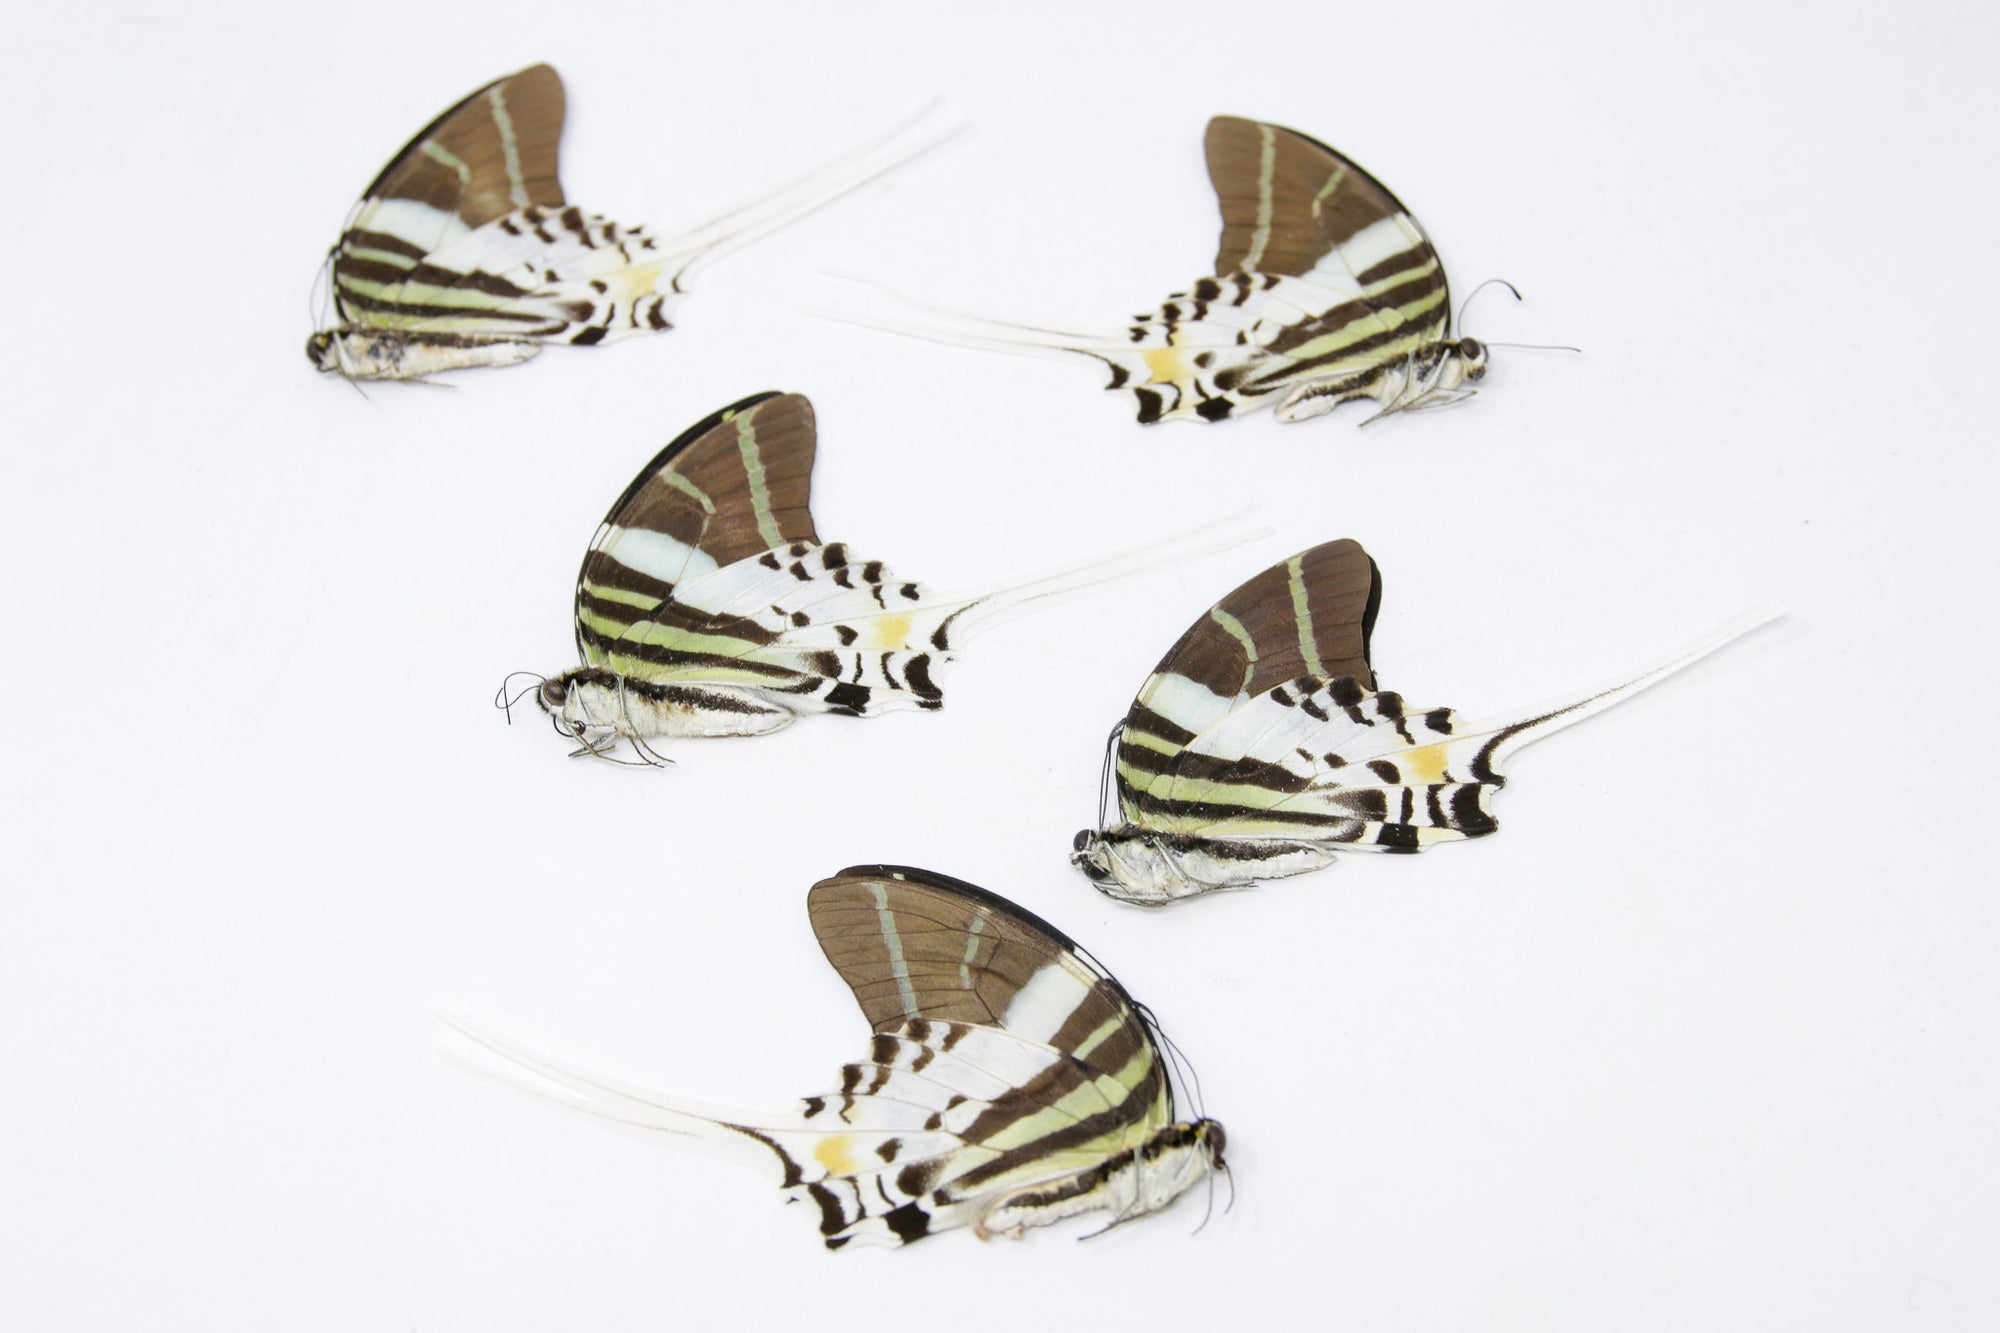 5 x Graphium androcles | Giant Swallowtail Butterflies | A1 Unmounted Specimens